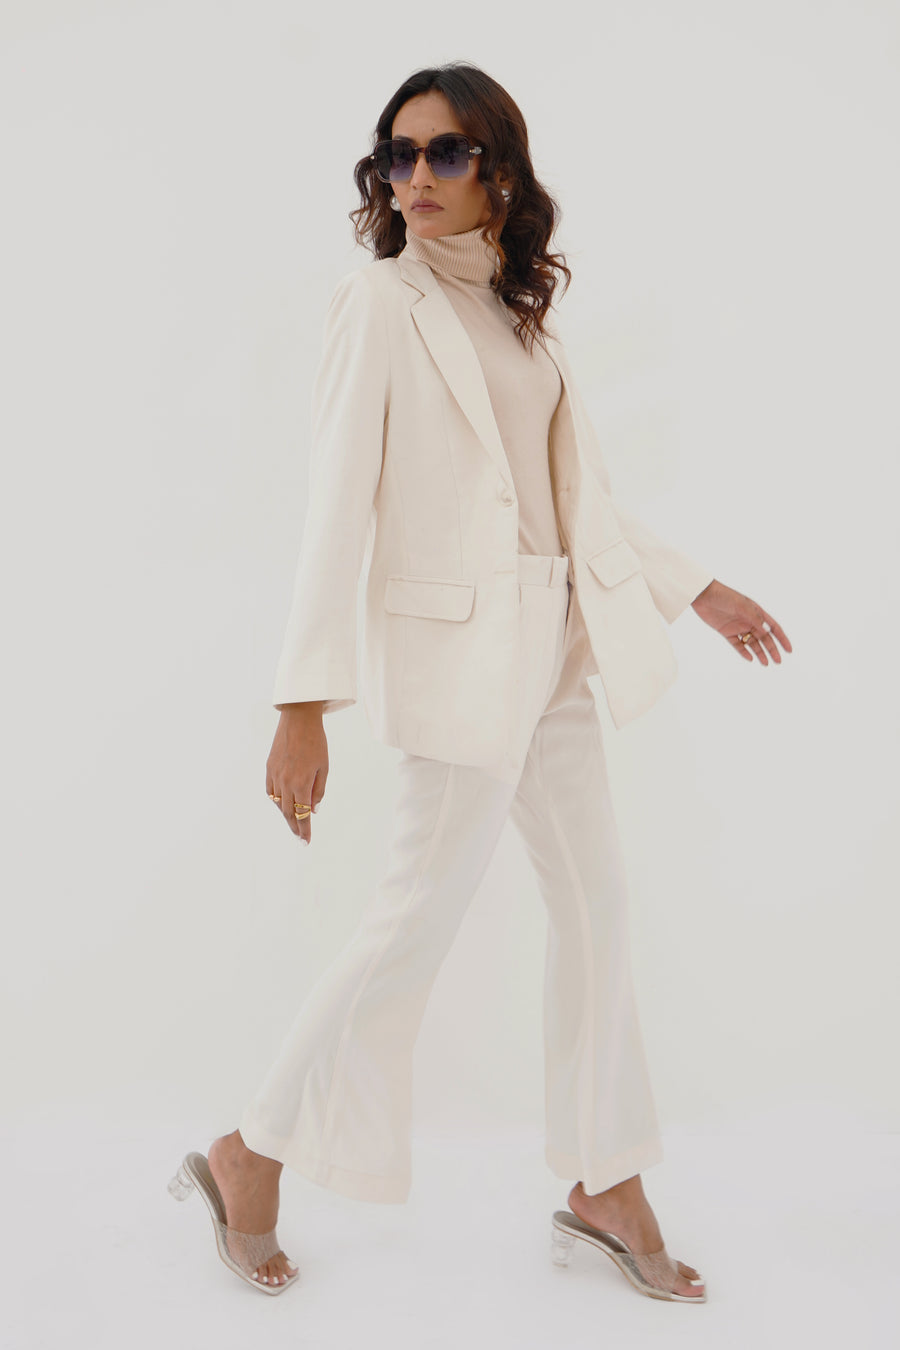 Genevieve 2 Piece Suit off white (10 days delivery time)